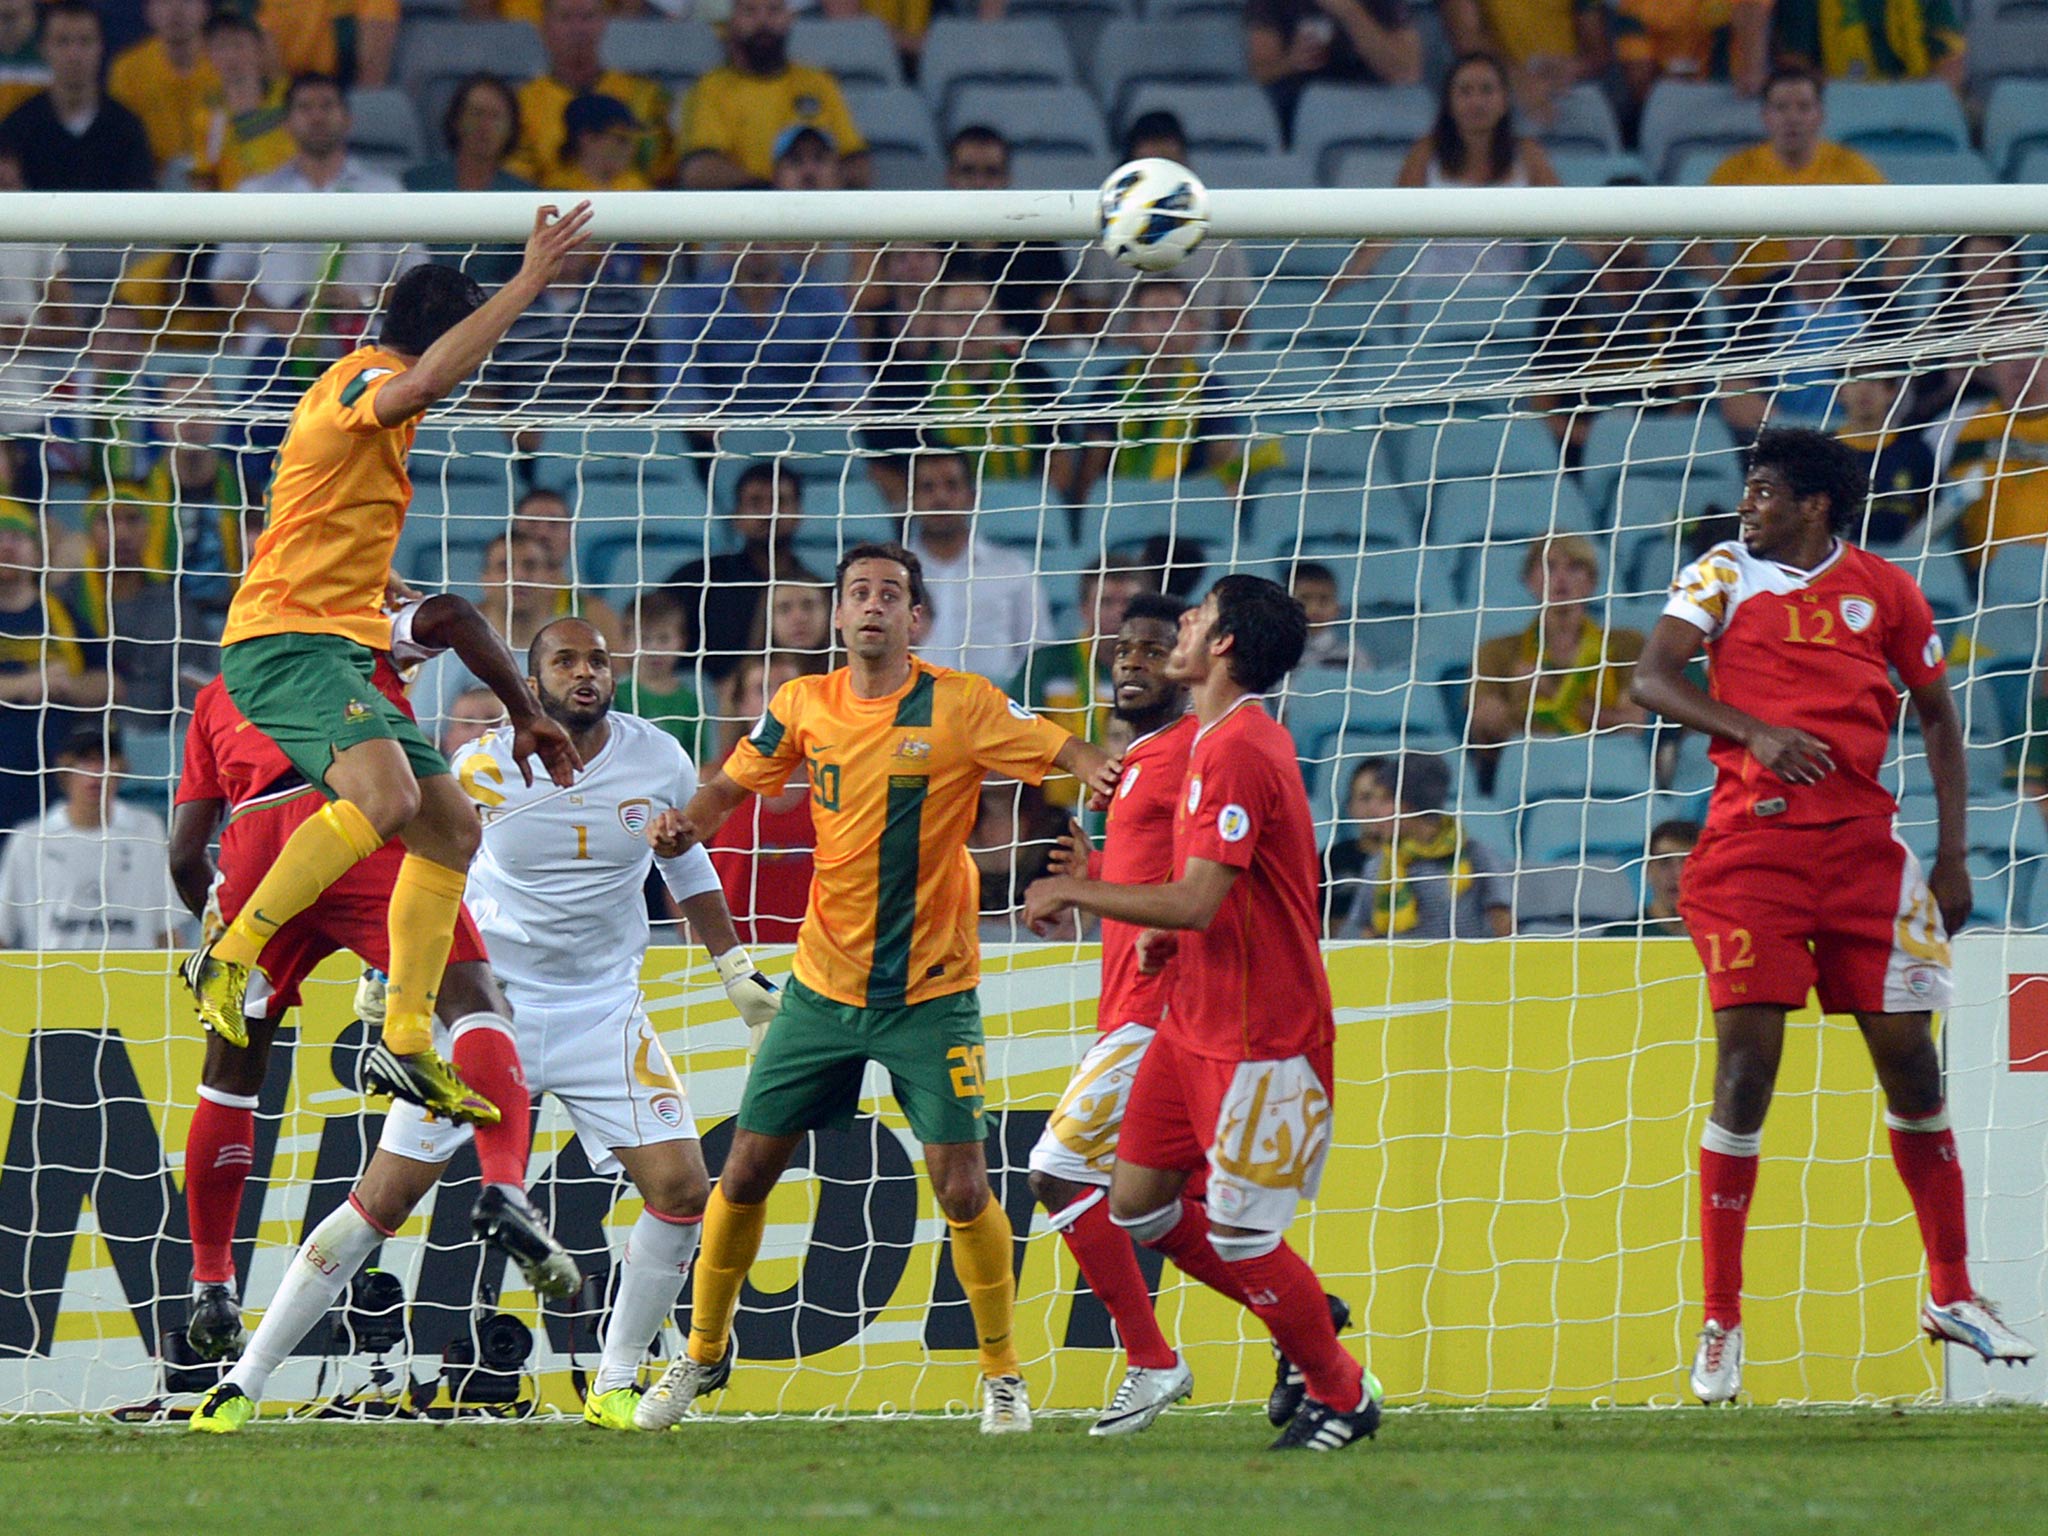 Tim Cahill pulls a goal back for Australia against Oman in a World Cup qualifier